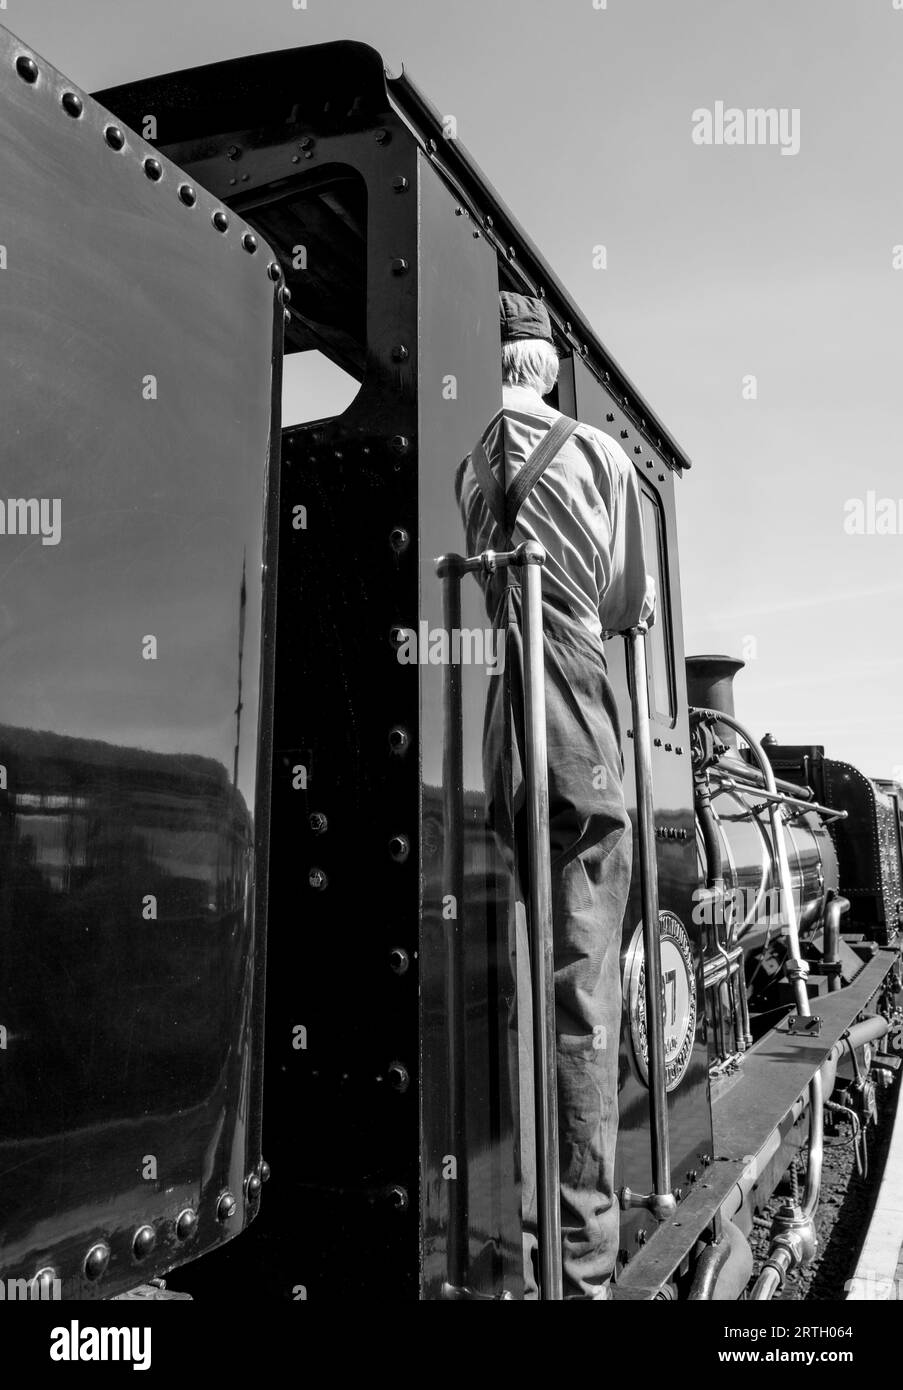 The Snowdonia Star steam train waiting at the Porthmadoc station. Stock Photo